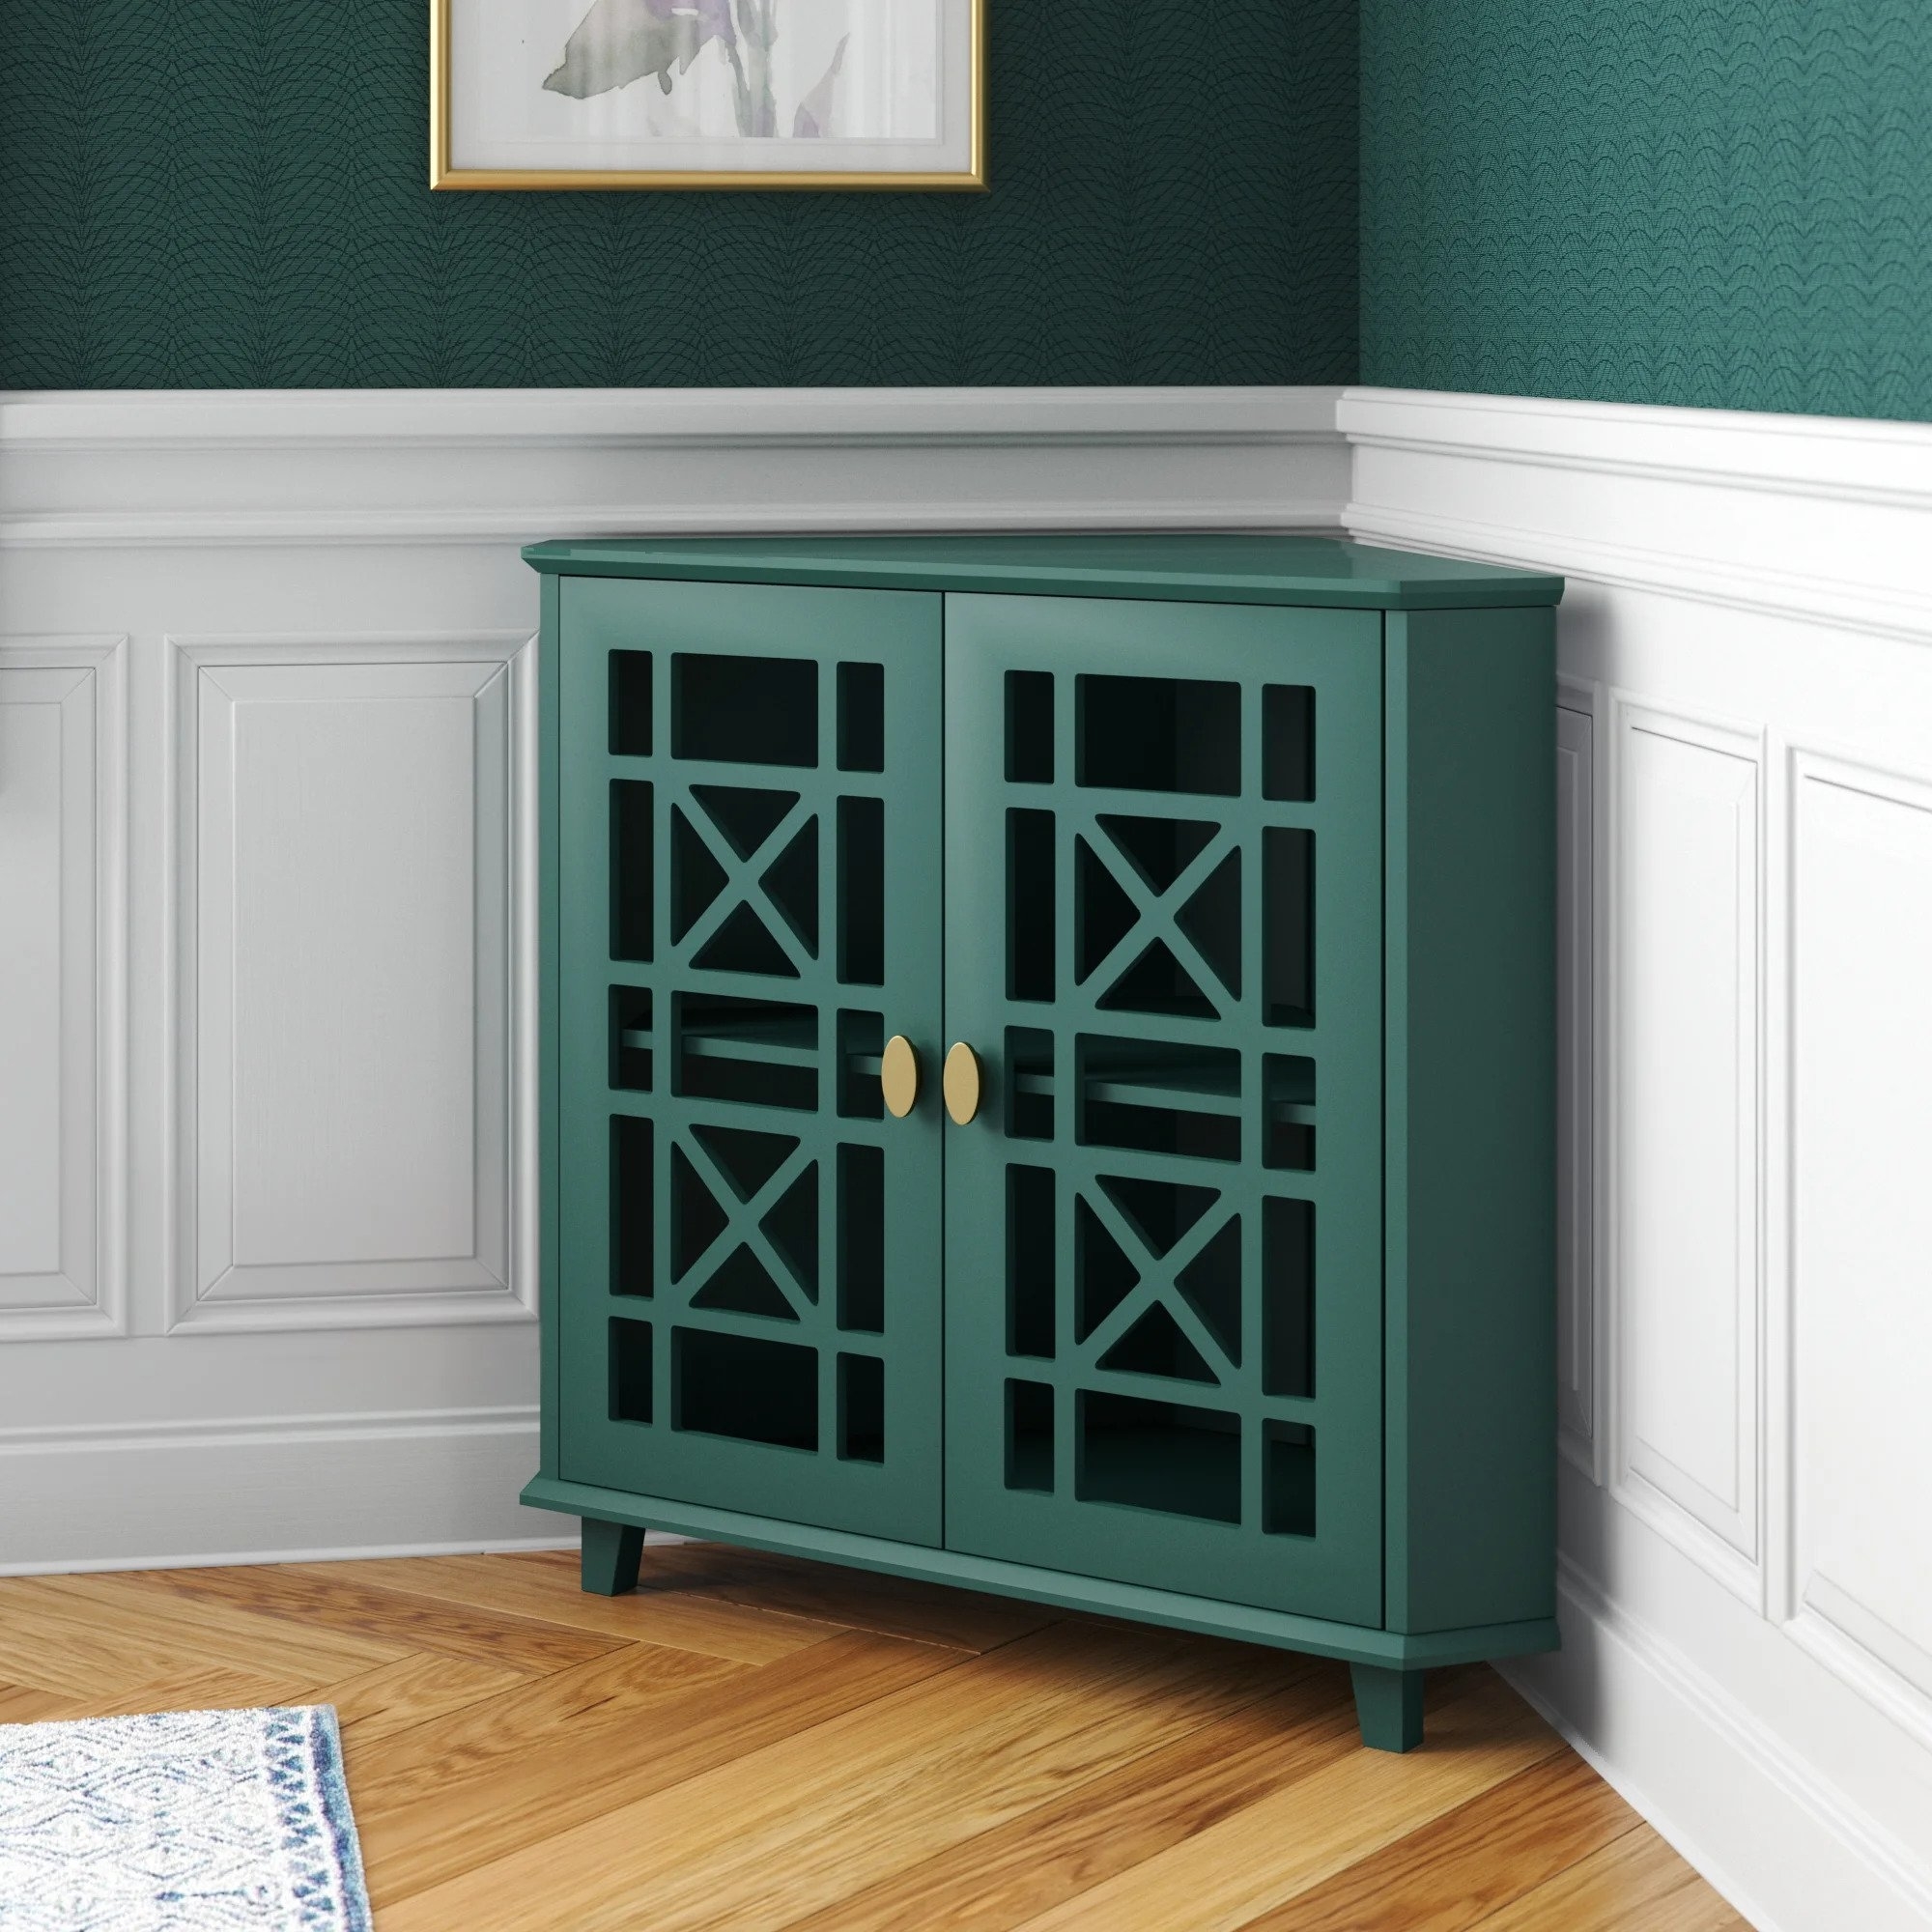 The V-shaped cabinet in teal, featuring an openwork trellis design on the doors, brass knobs, and a teal finish